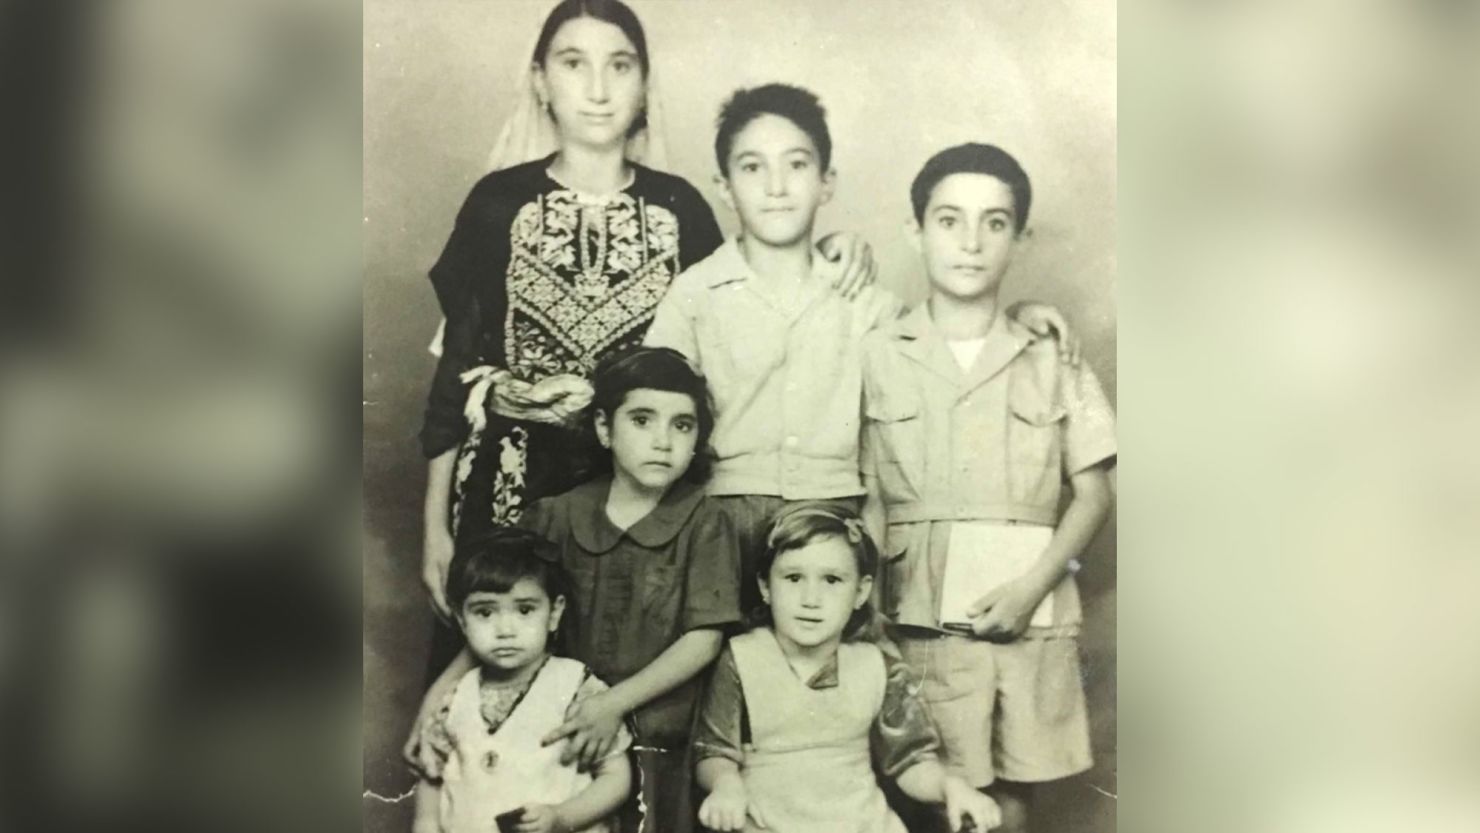 Mohammad Zarqa, top center, poses with some of his siblings in the British Mandate of Palestine in 1946. The family was among roughly 700,000 Palestinians who fled or were expelled from their homes in 1948 during al-Nakba, as armed Jewish groups sought to establish the state of Israel.